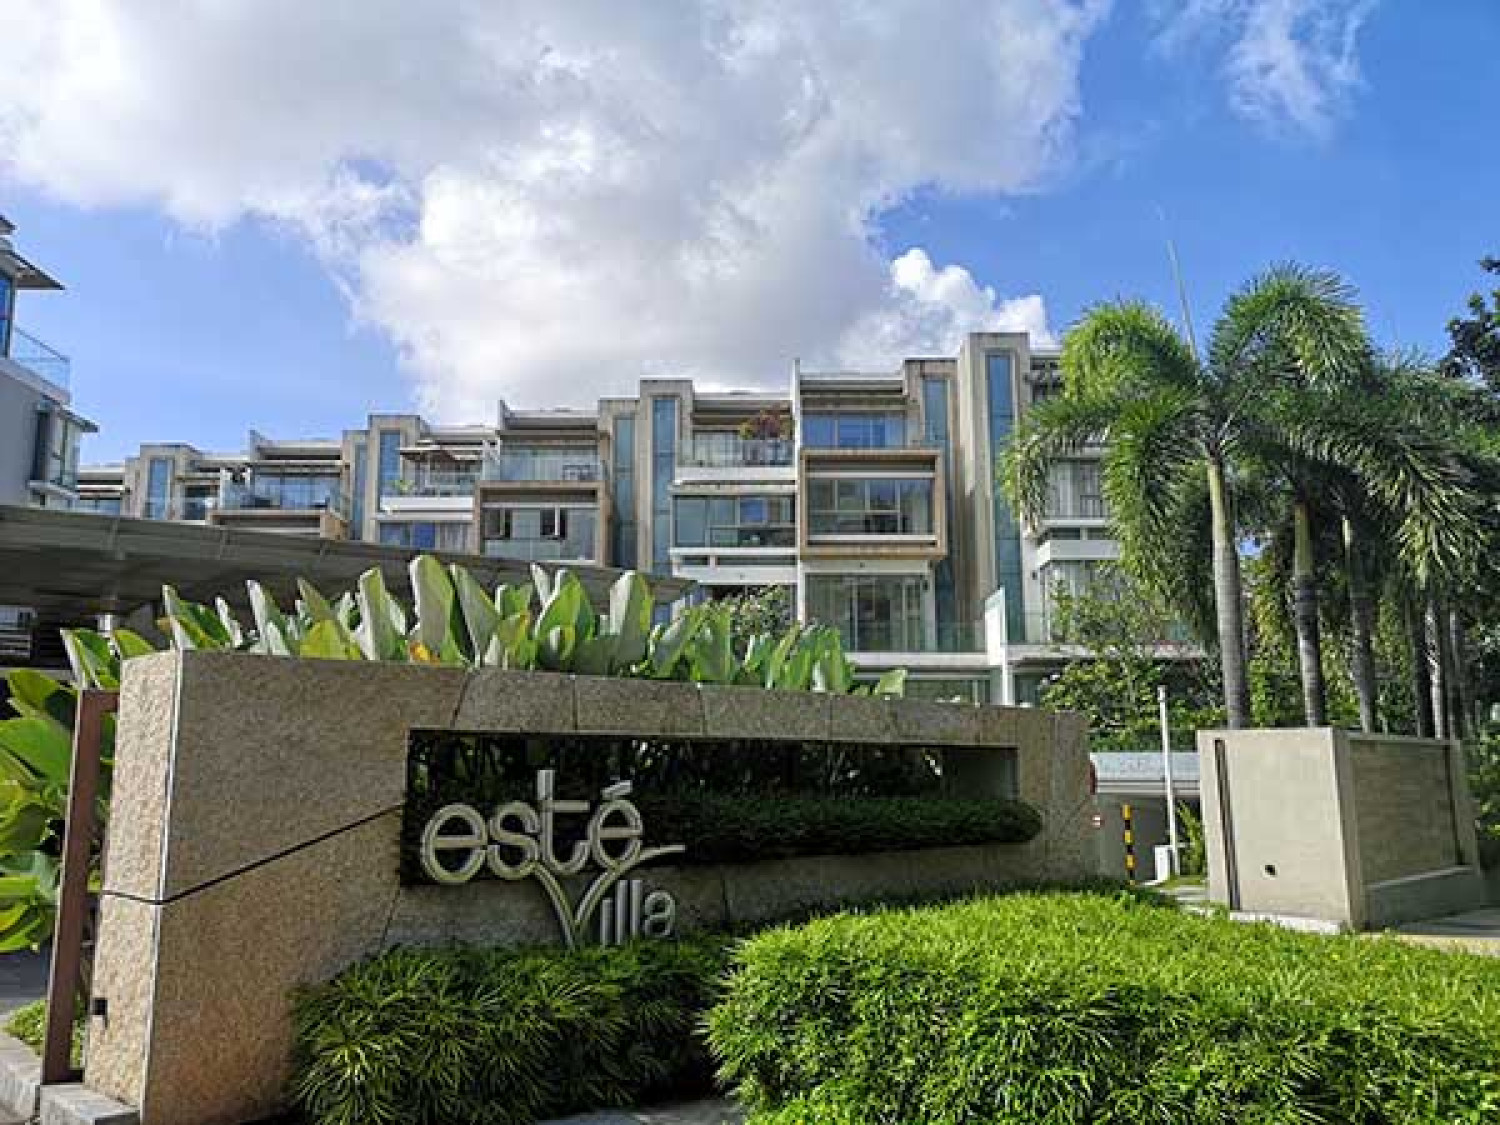 Freehold strata terraced house at Este Villa going for $2.35 mil - Property News